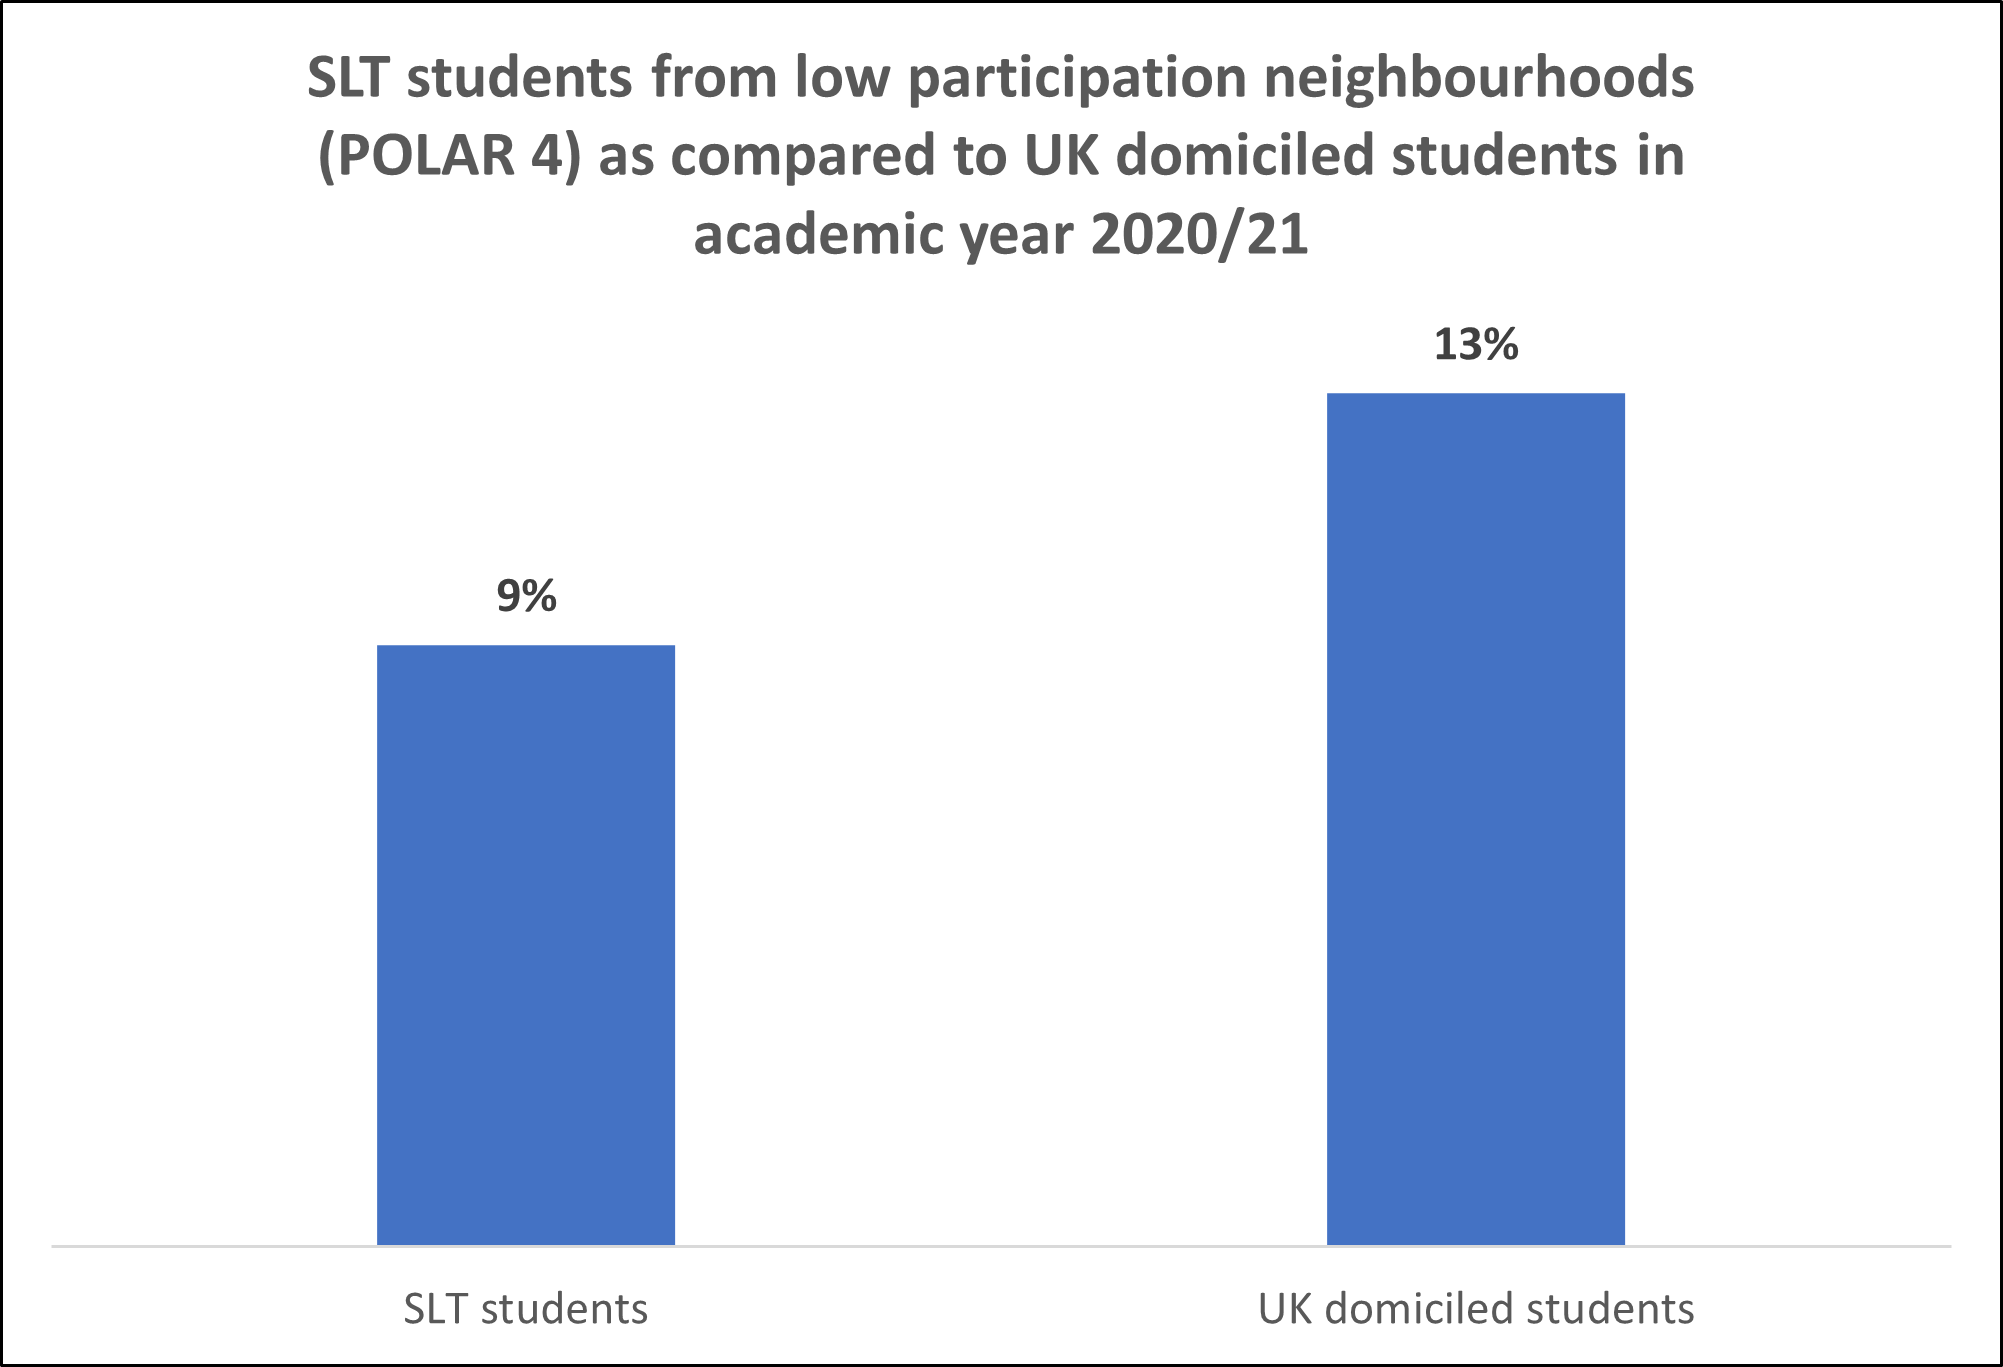 Bar graph – SLT students from low participation neighbourhoods (POLAR 4) as compared to UK domiciled students in academic year 202/21 SLT Students 9%, UK domiciled students 13%